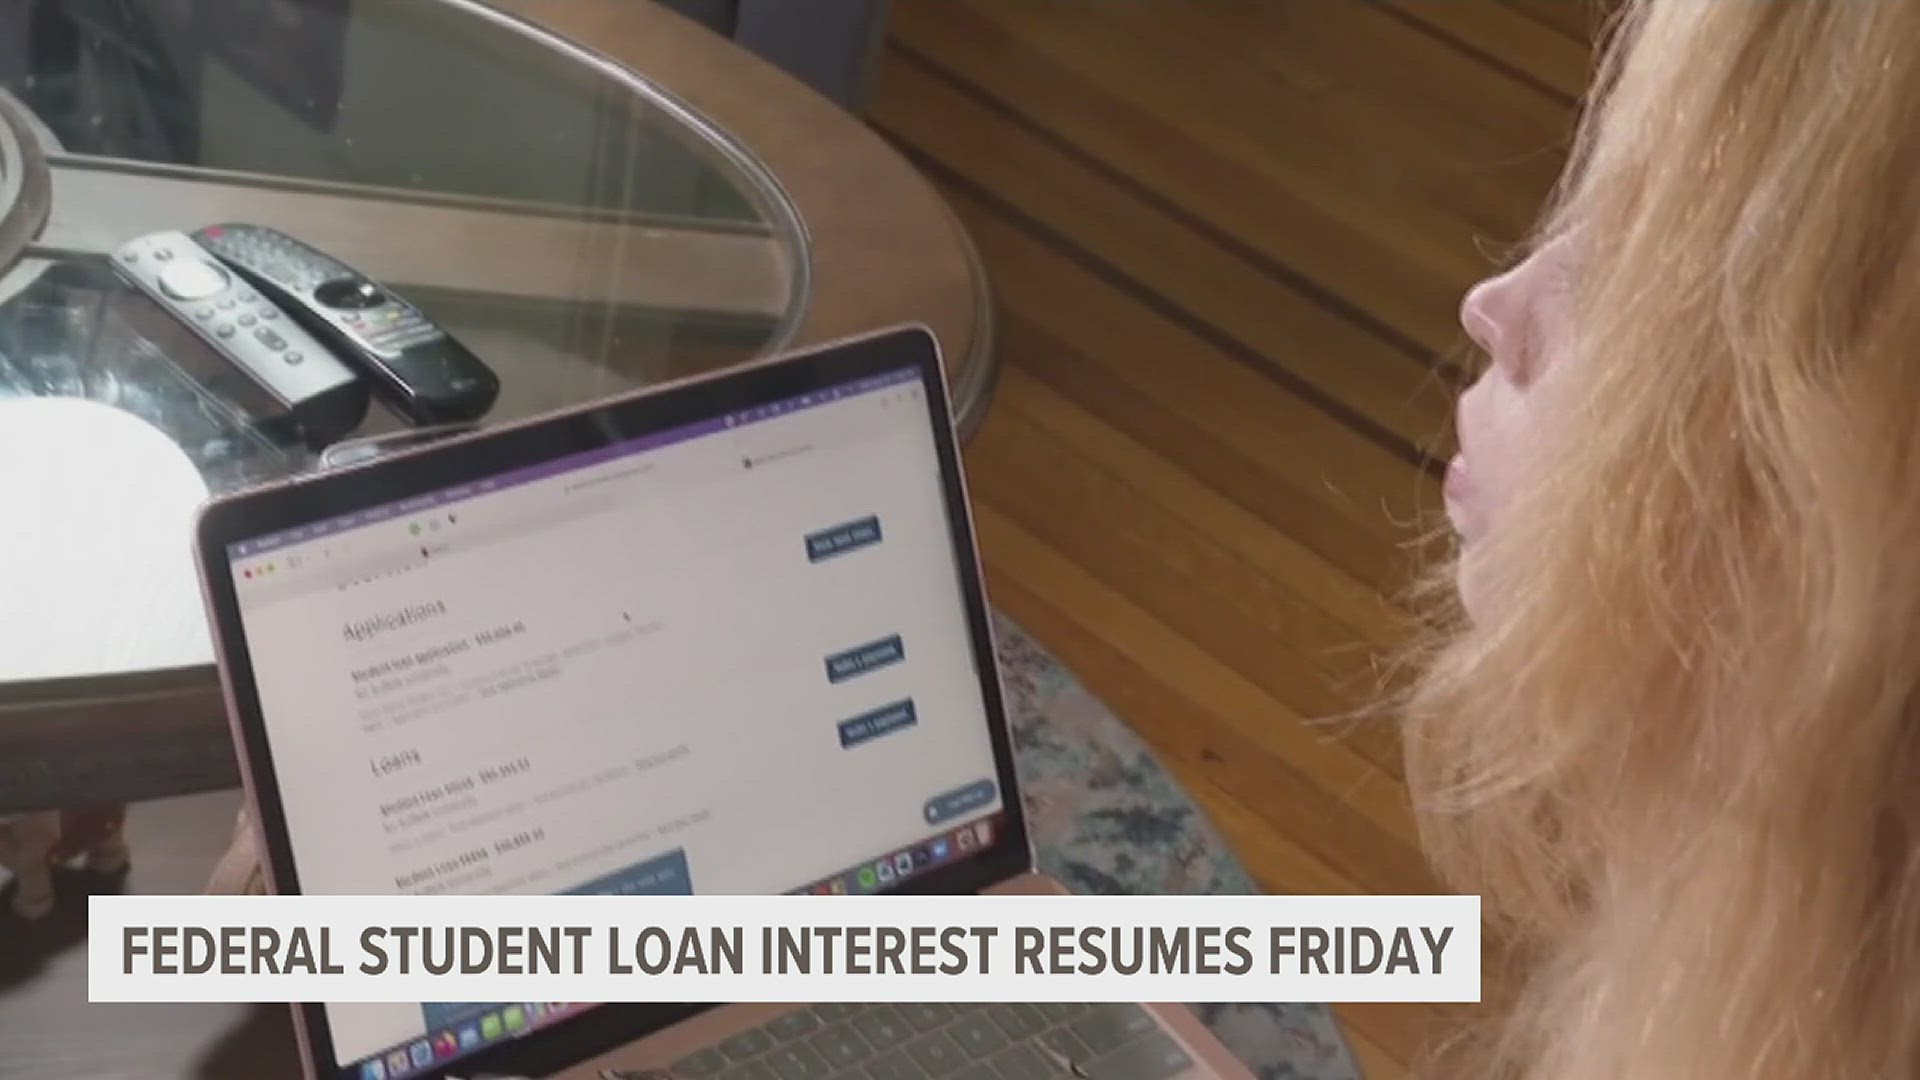 After three years, the federal student loan repayment pause is coming to an end.